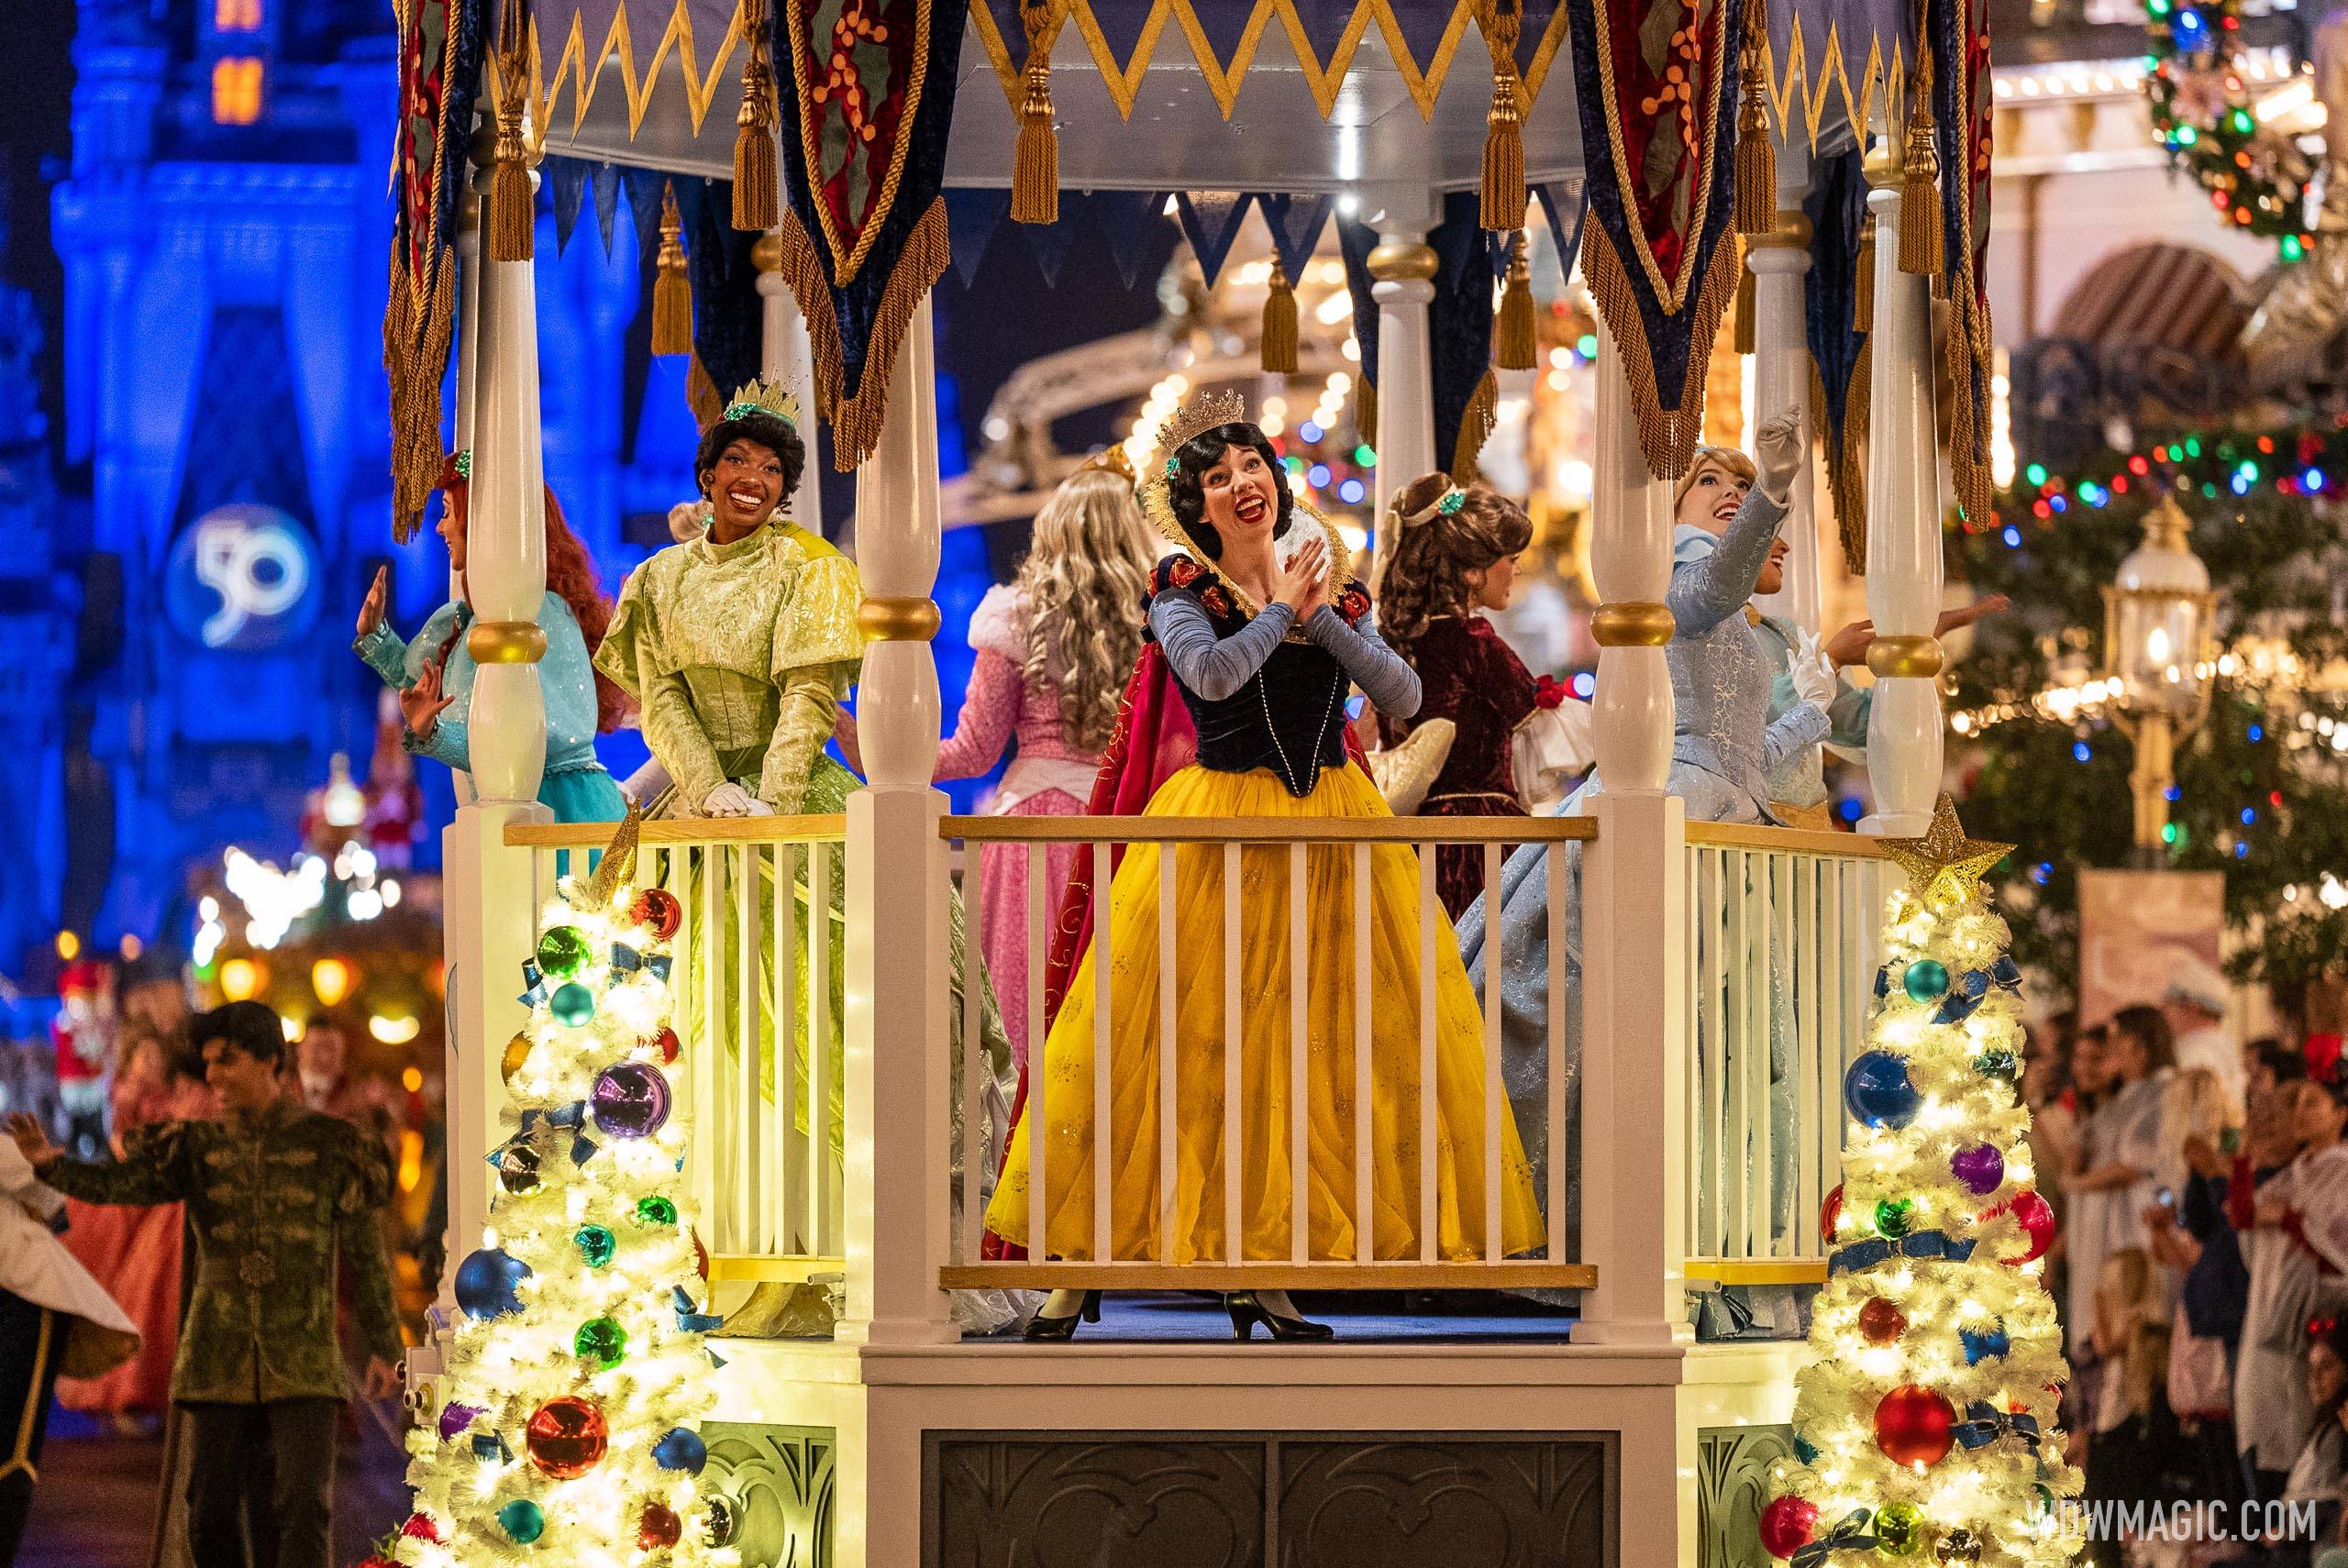 Mickey’s Once Upon a Christmastime Parade to be shown during regular park hours from Dec 19th to Dec 31st 2009